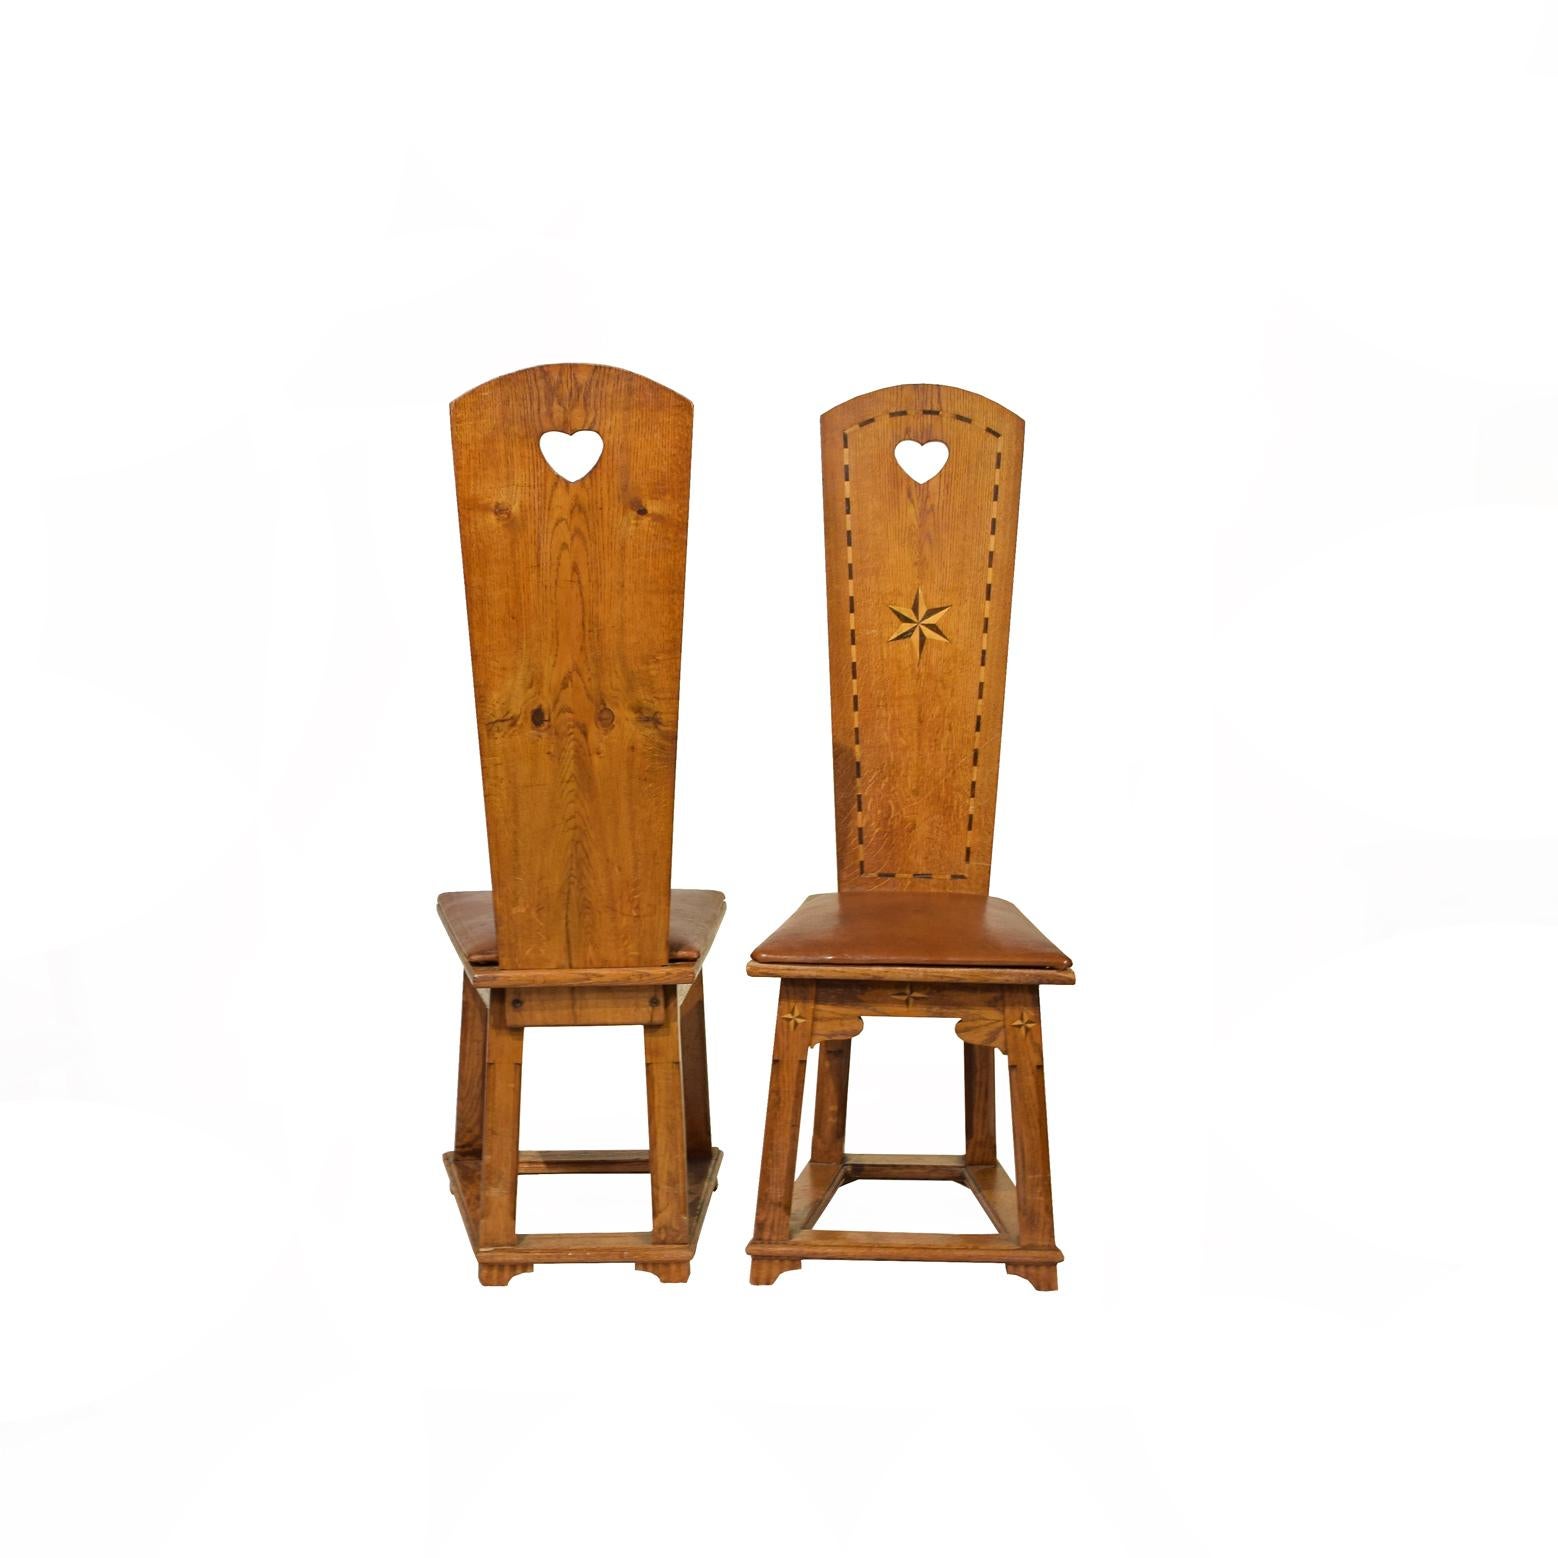 Swedish Rare 10 Arts & Craft Chairs from Villa Foresta Lidingö Sweden 1908-1910 For Sale